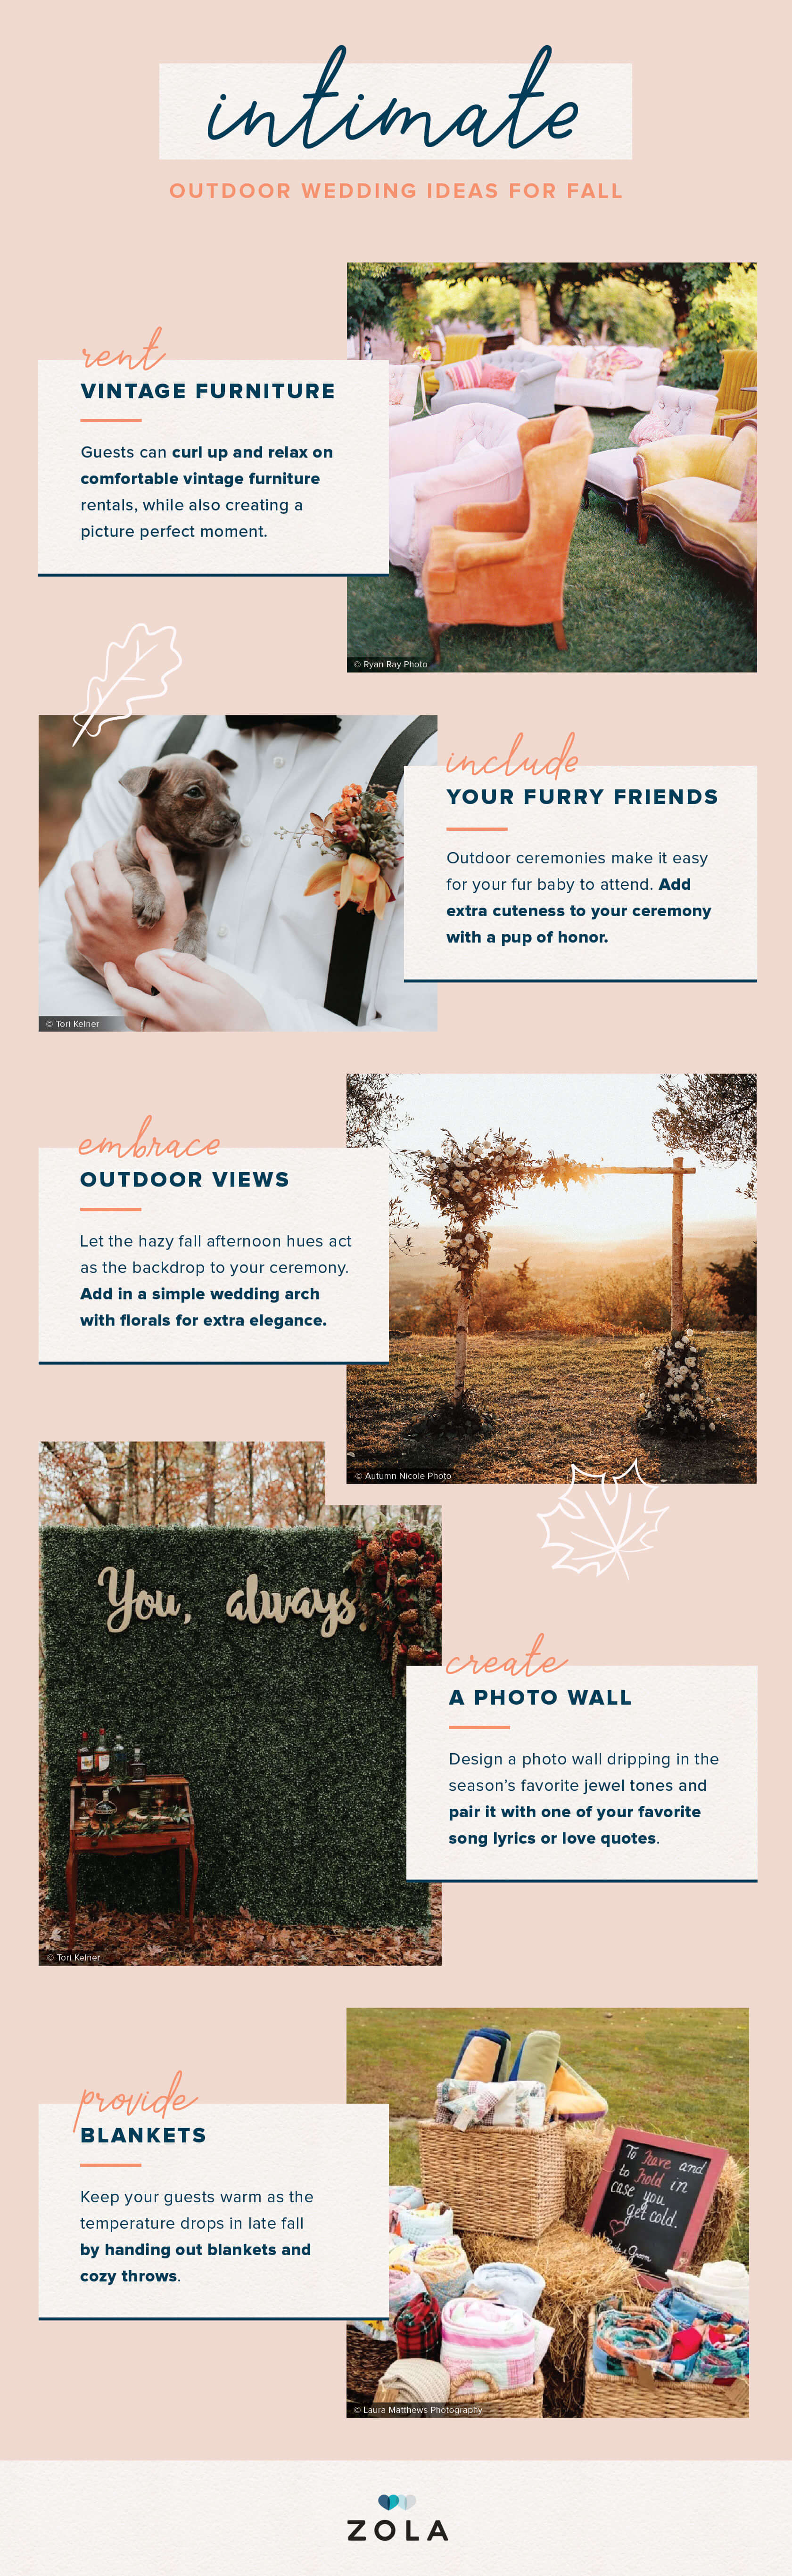 outdoor-wedding-ideas-for-fall-intimate